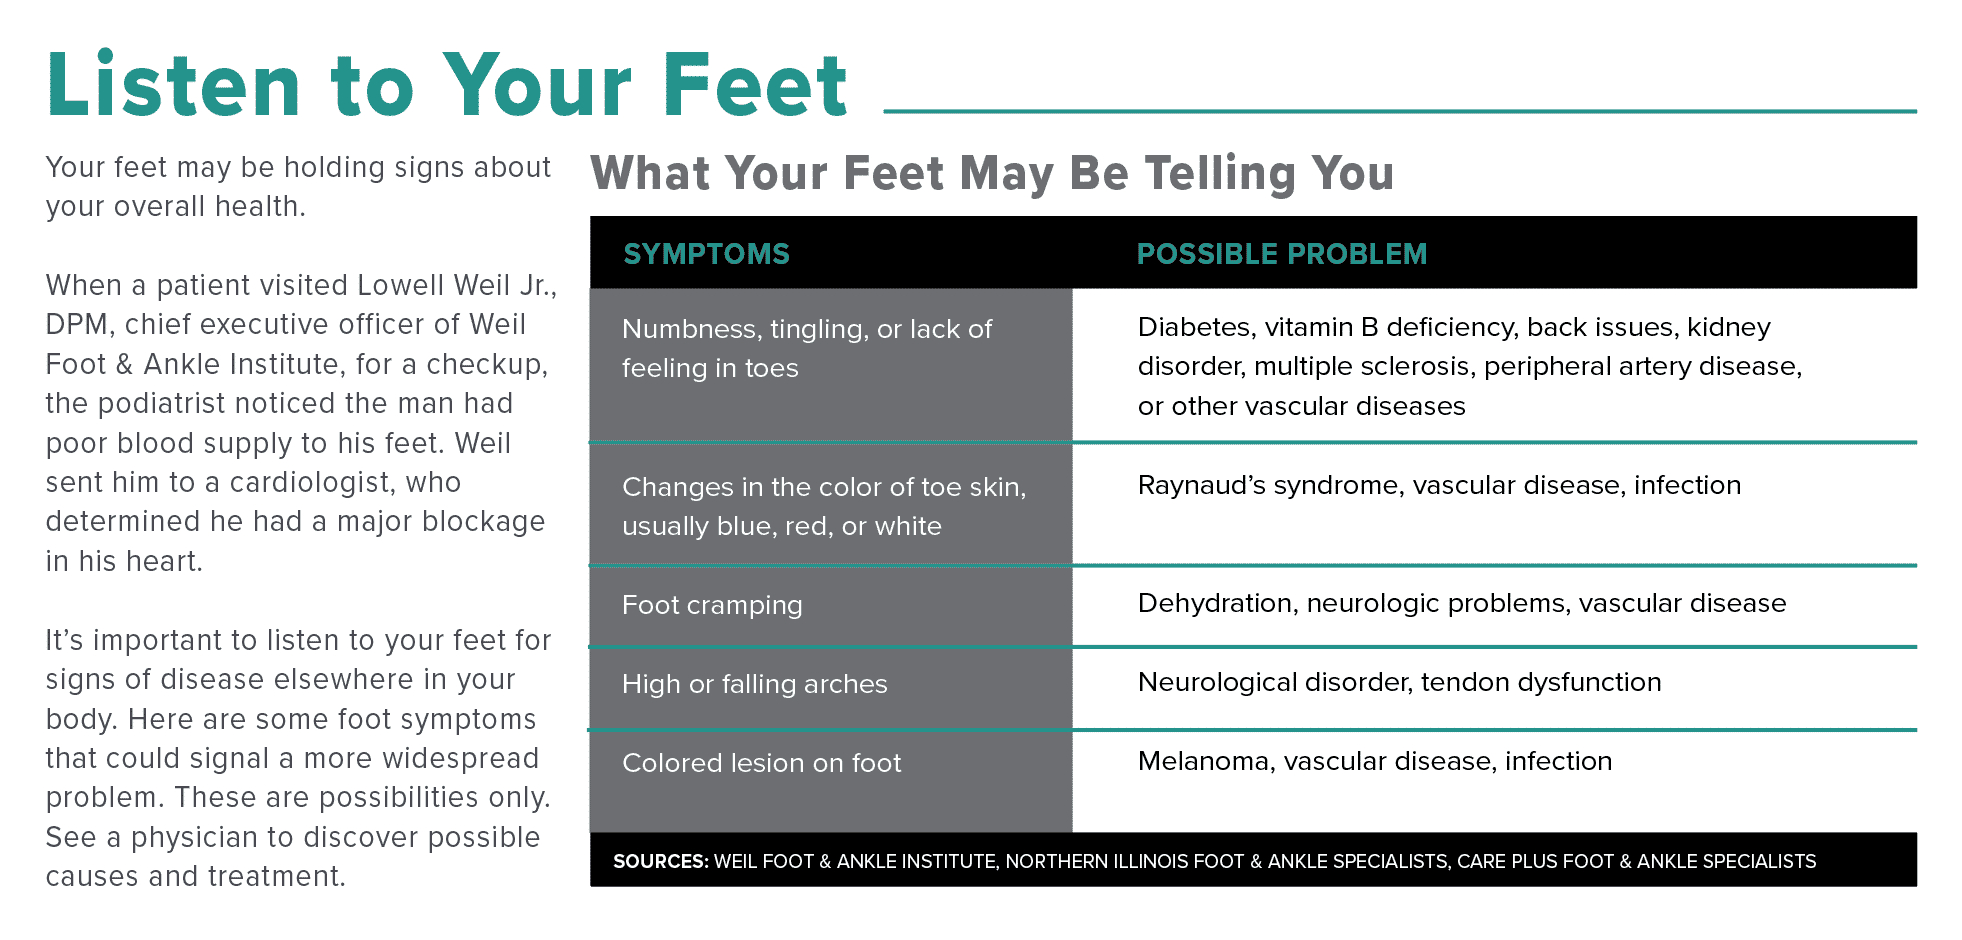 Listen to Your Feet